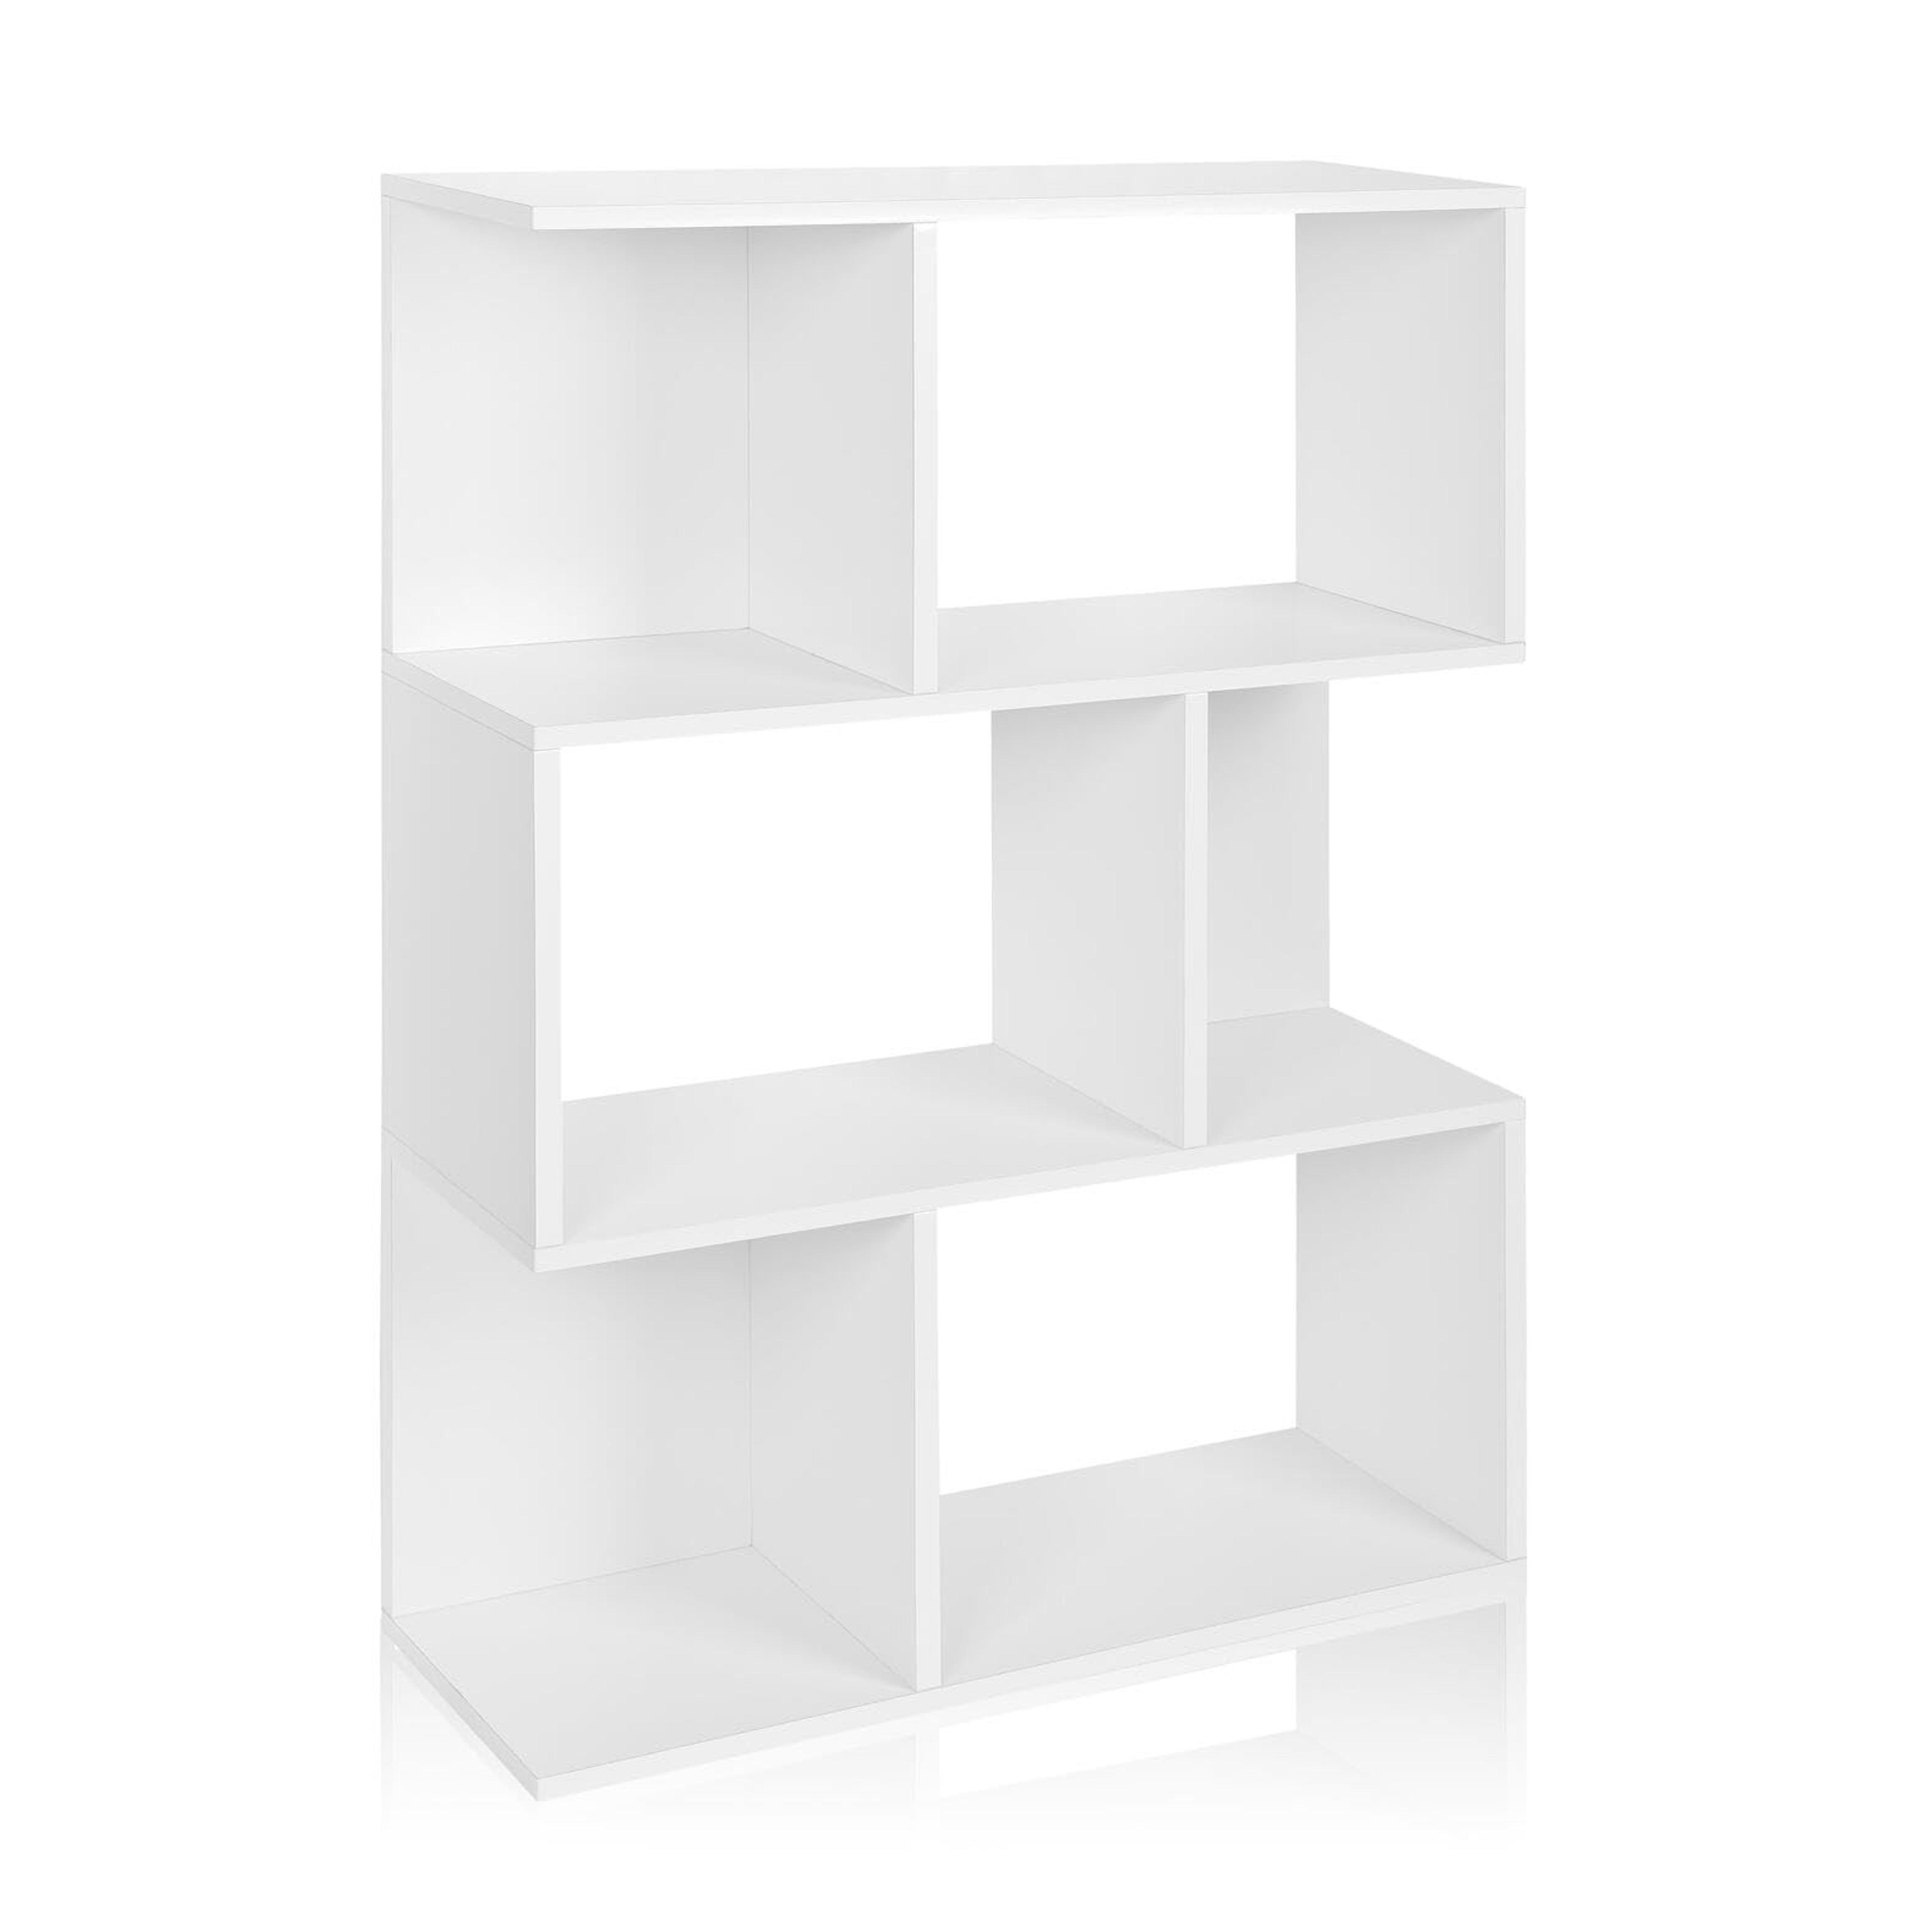 Way Basics Eco Madison Bookcase, Room Divider and Storage Shelf, White (made from sustainable non-toxic zBoard paperboard)